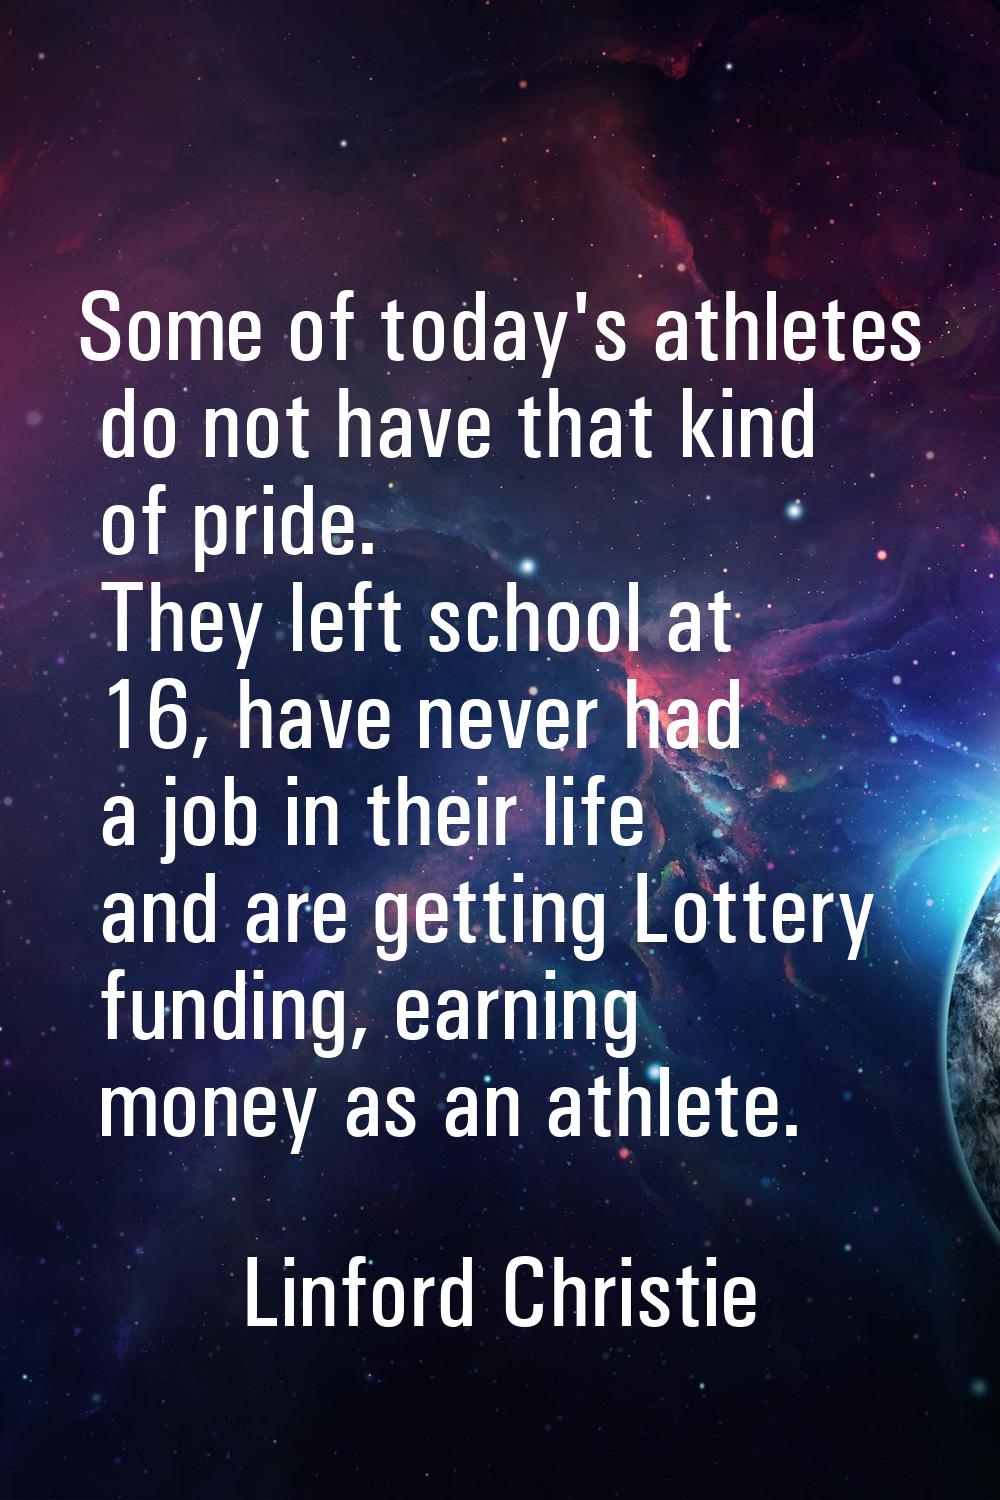 Some of today's athletes do not have that kind of pride. They left school at 16, have never had a j